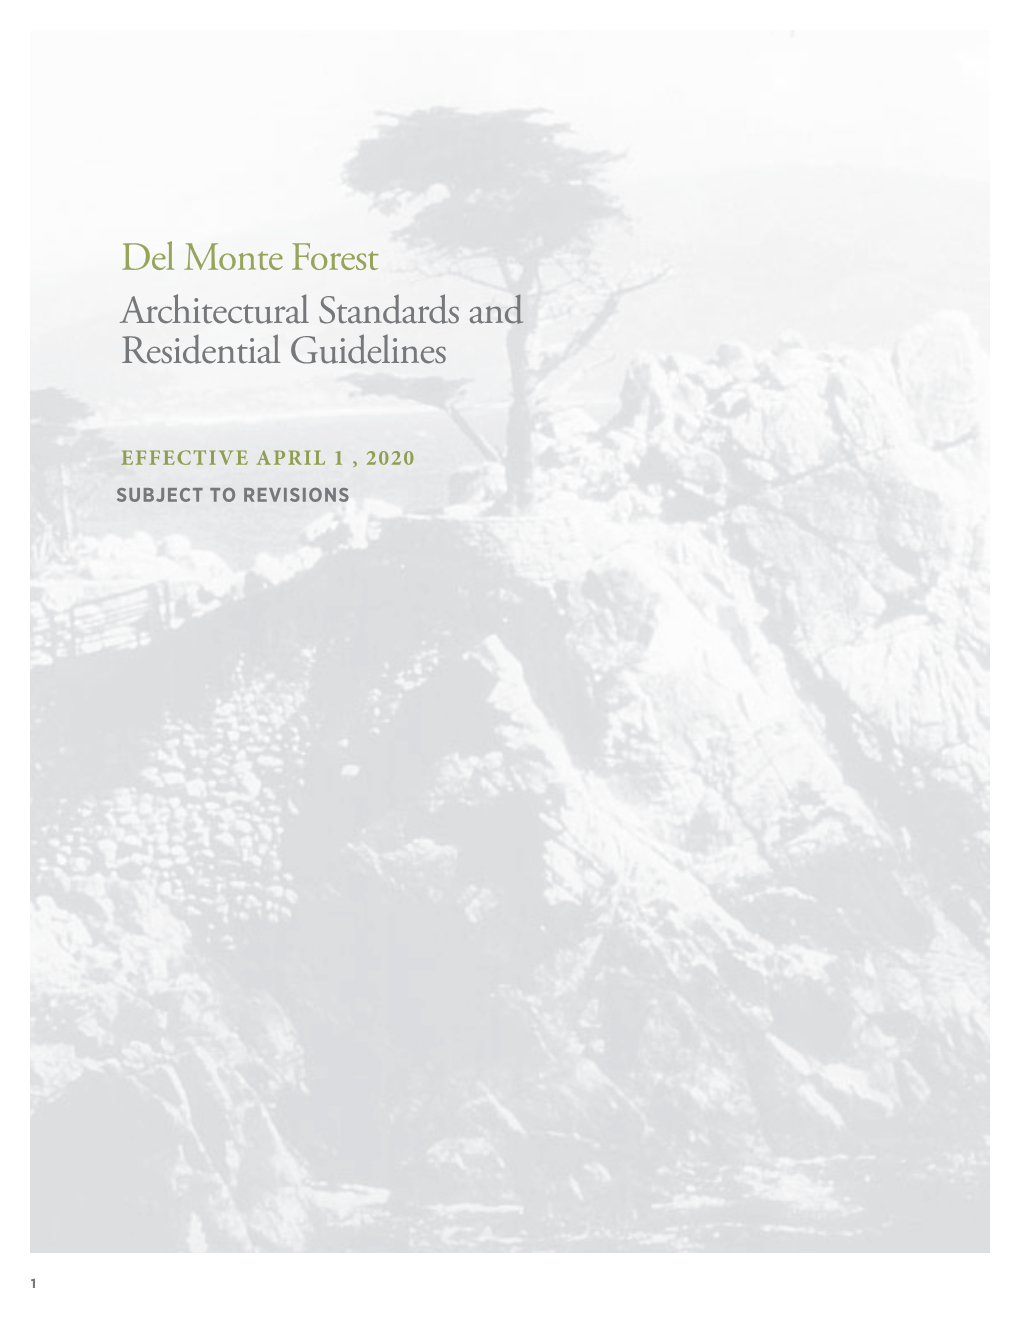 Del Monte Forest Architectural Standards and Residential Guidelines